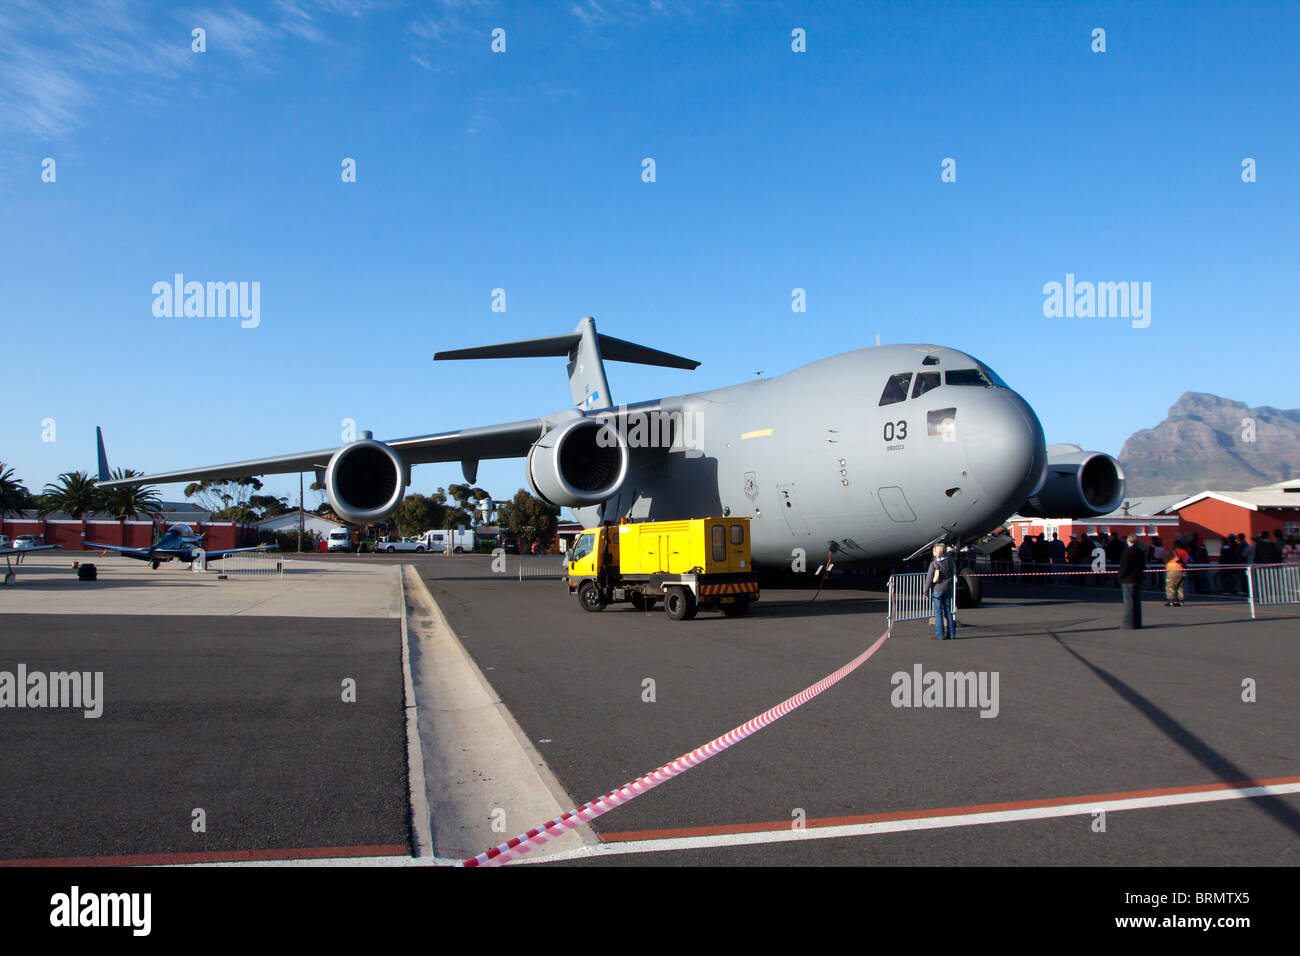 U.S. Air Force Boeing C-17 Globemaster III at the air show Stock Photo